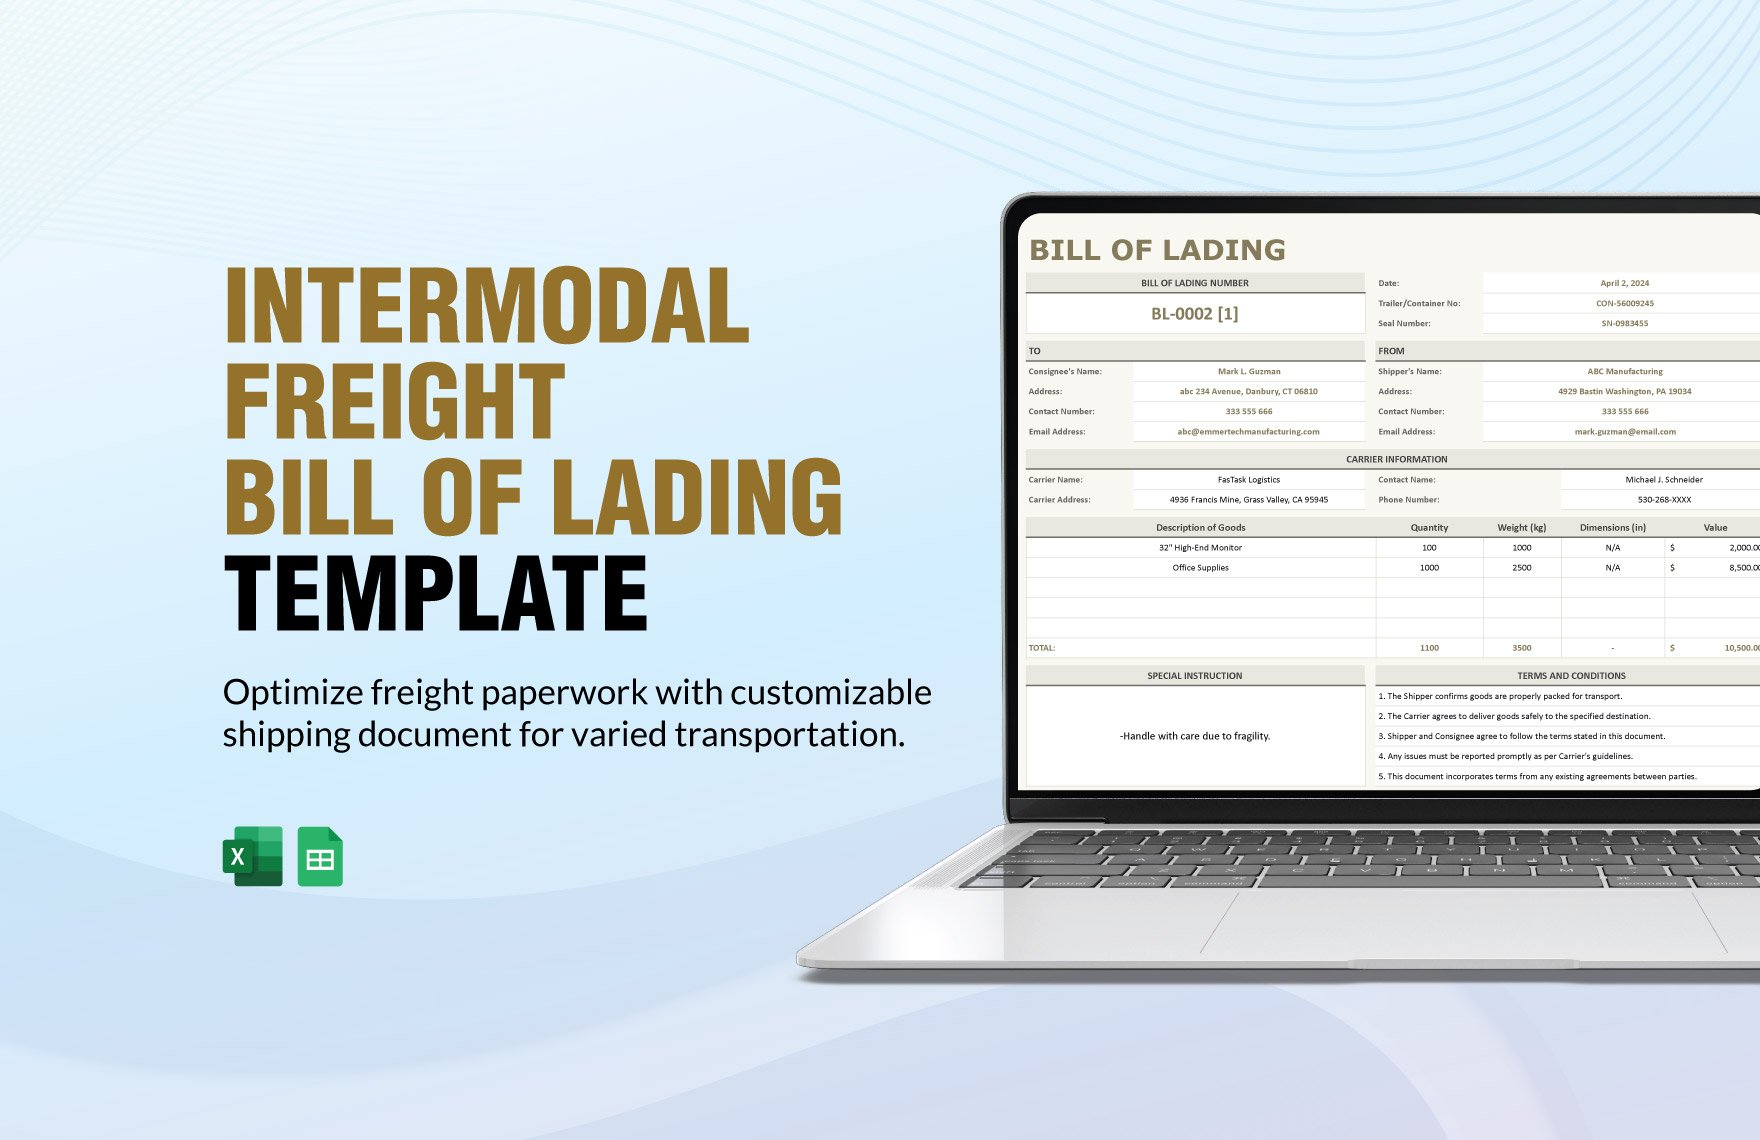 Intermodal Freight Bill of Lading Template